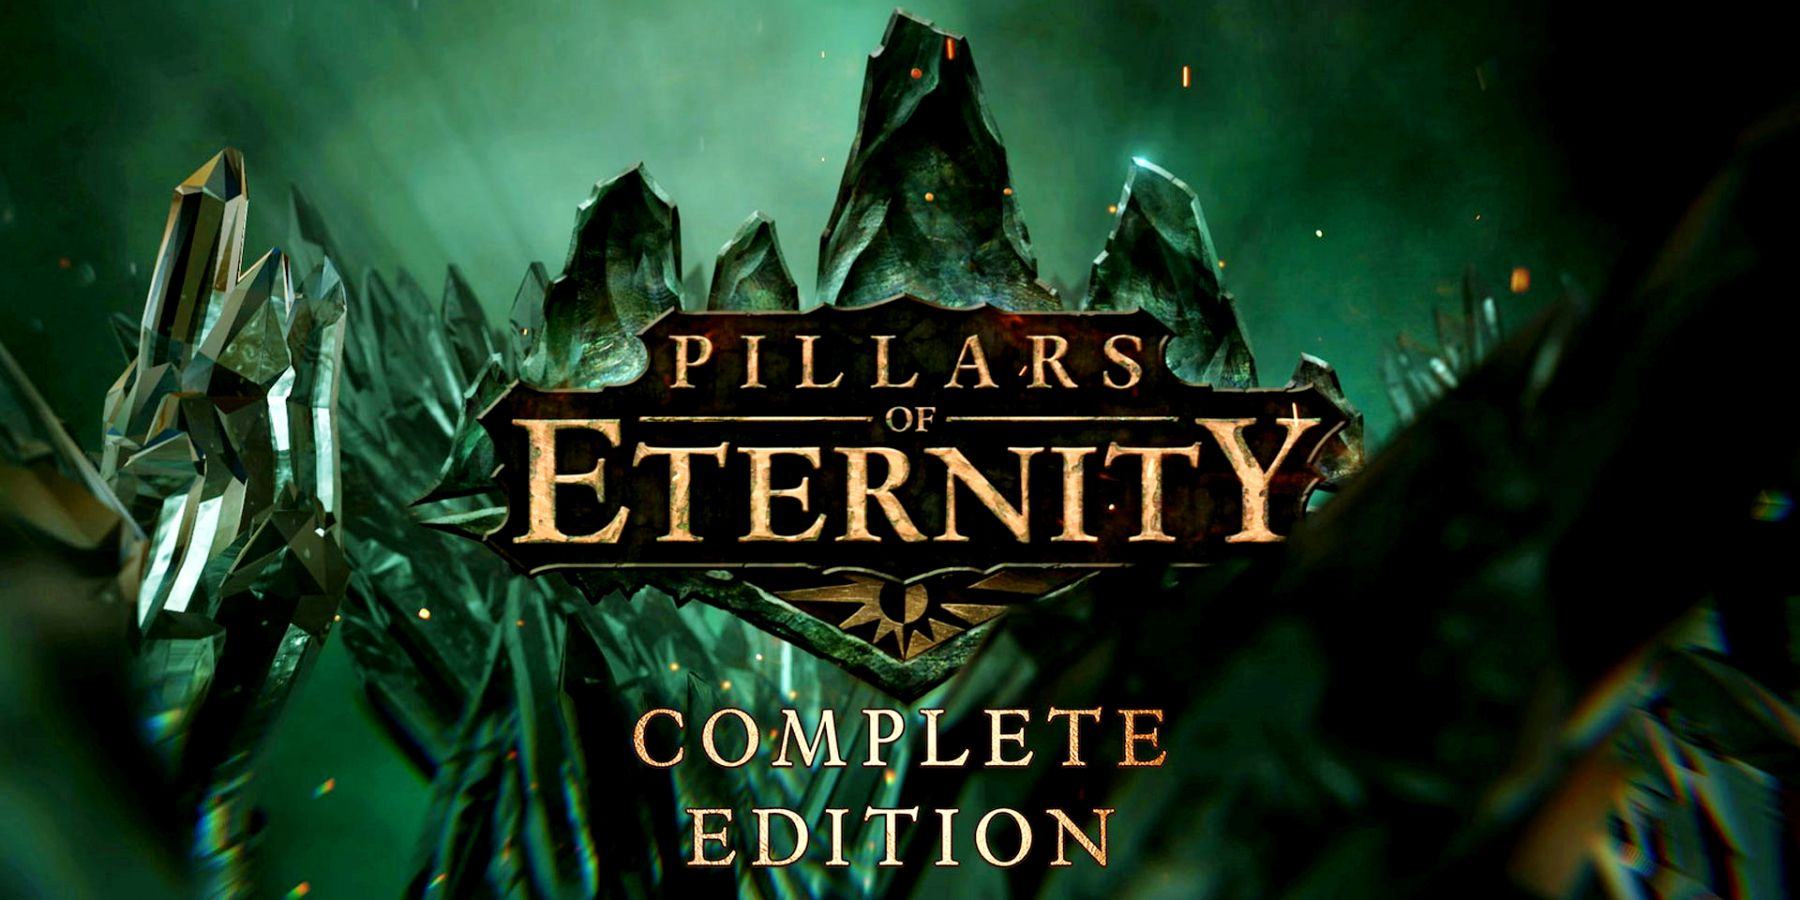 Cover art for Pillars of Eternity: Complete Edition, showing the game's logo in front of a jagged rock column.